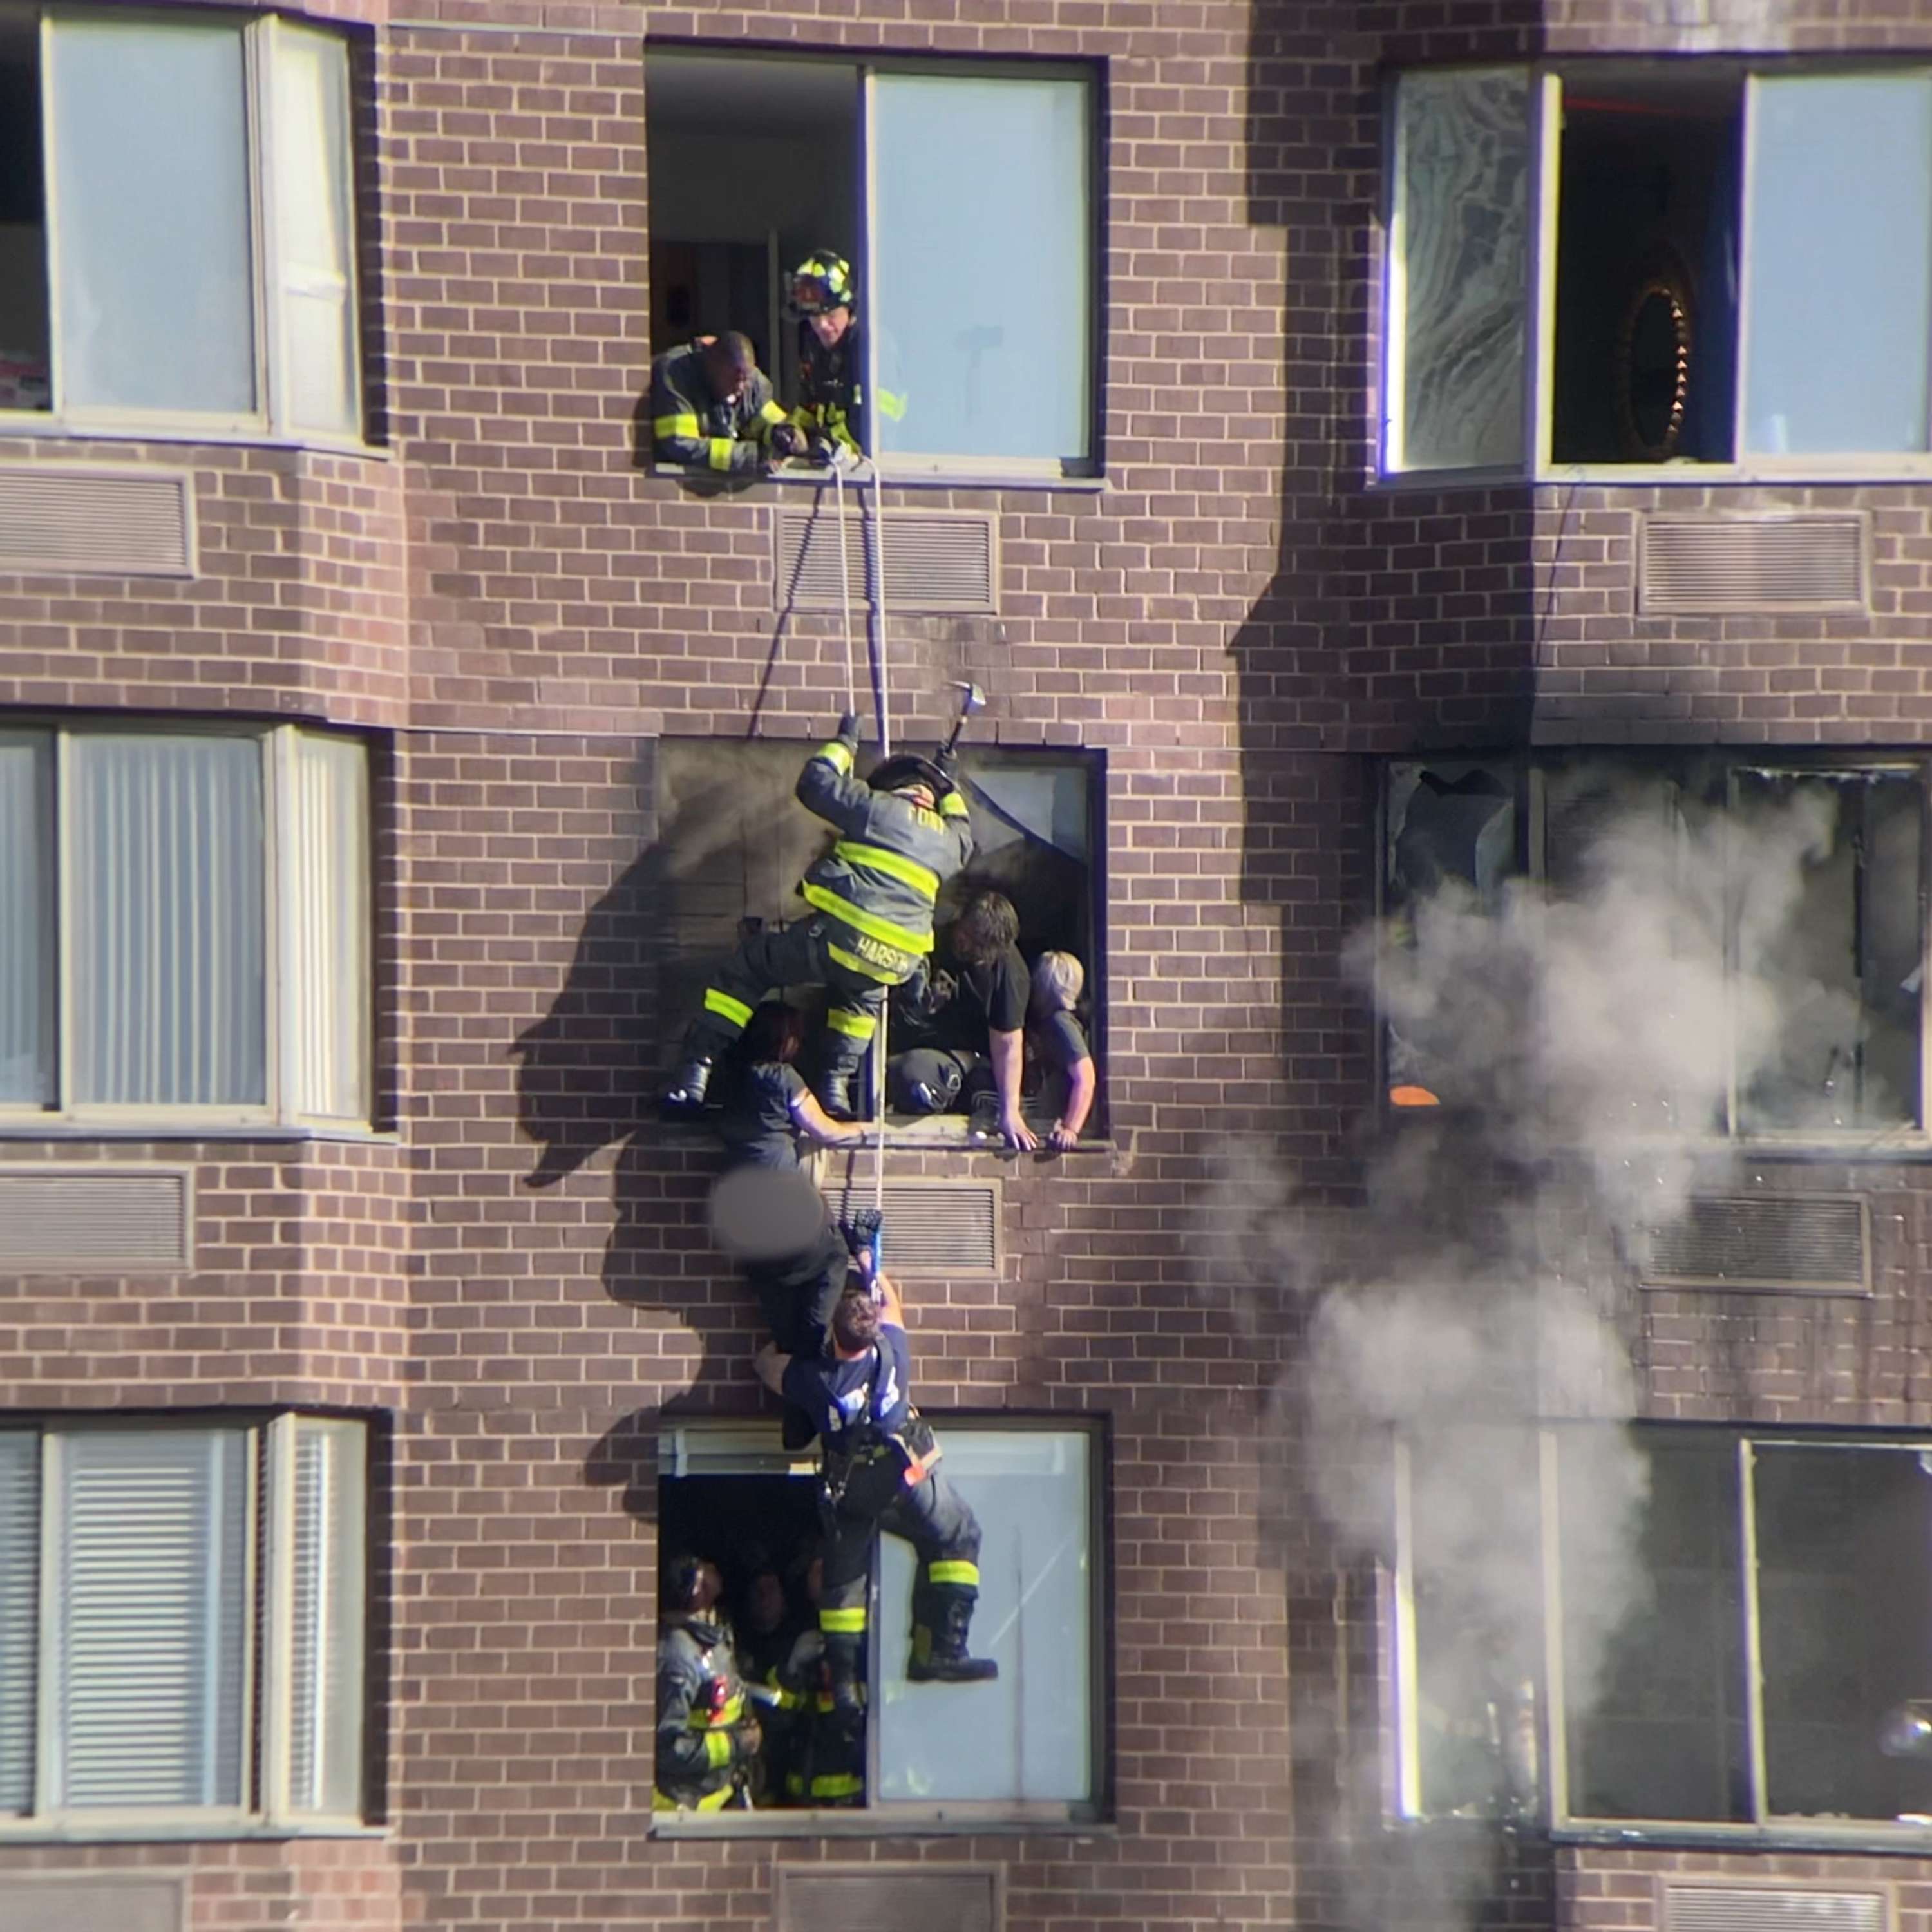 Manhattan roof rope rescues with FDNY Battalion Chief Anthony Pascocello, Lieutenants Adrienne Walsh and Joseph Decker, and Firefighters Darren Harsch, Christian Wellinger and Artur Podgorski